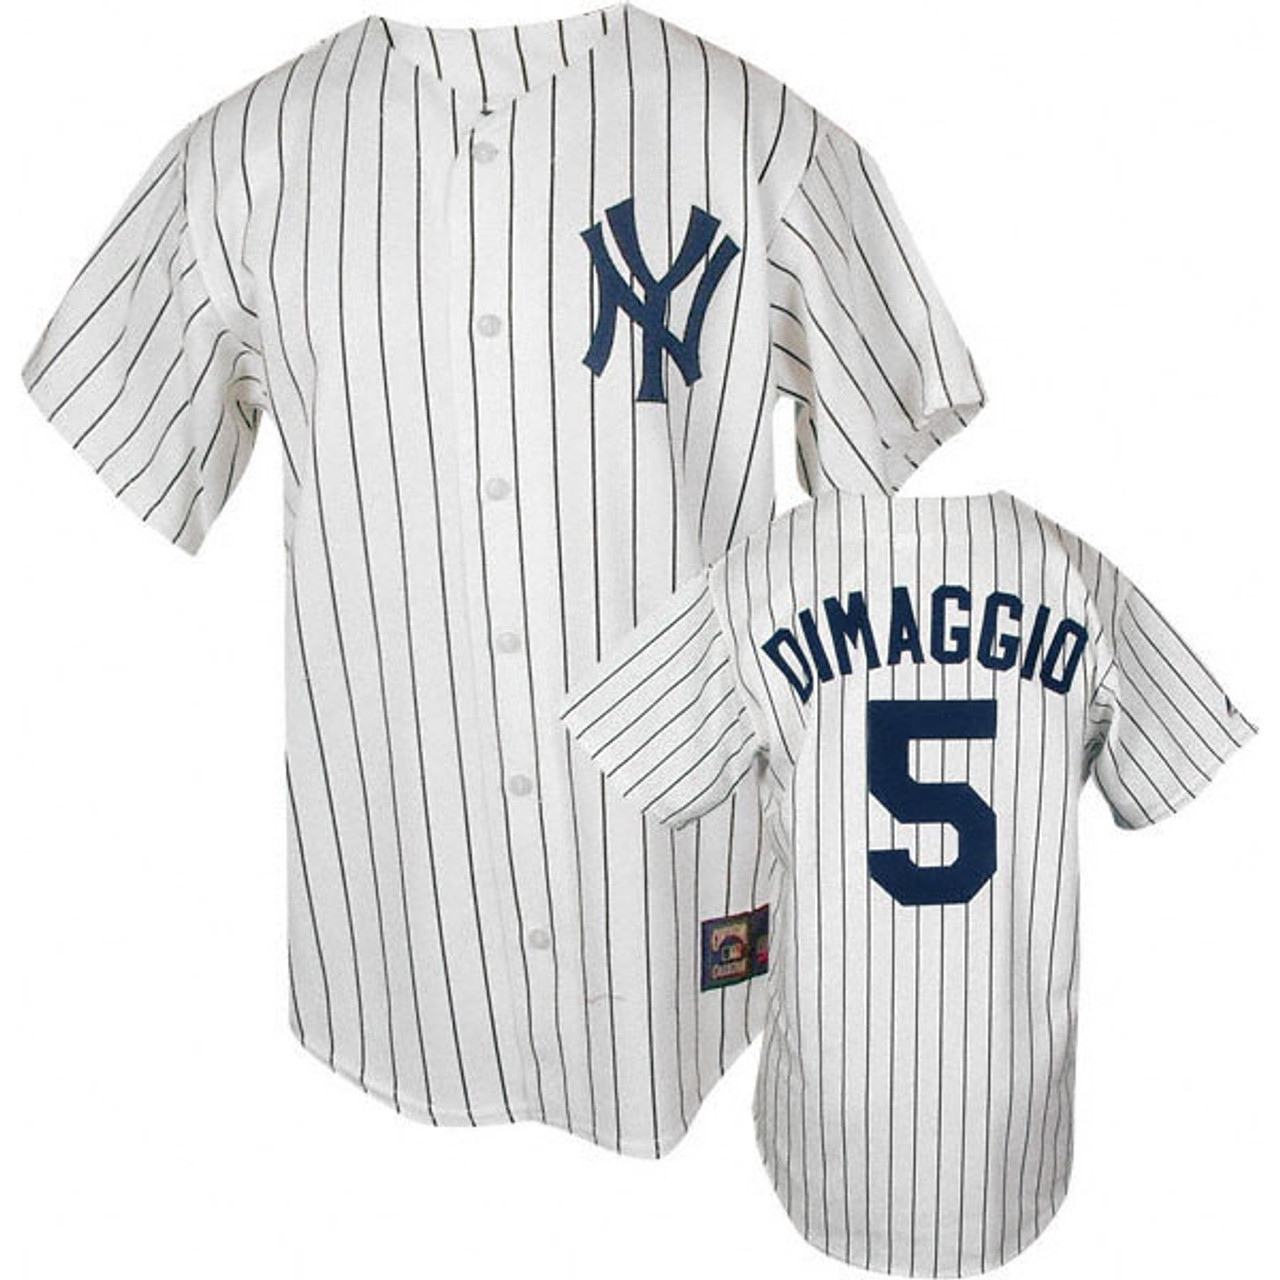 Jasson Dominguez Youth Jersey - NY Yankees Replica Kids Home Jersey